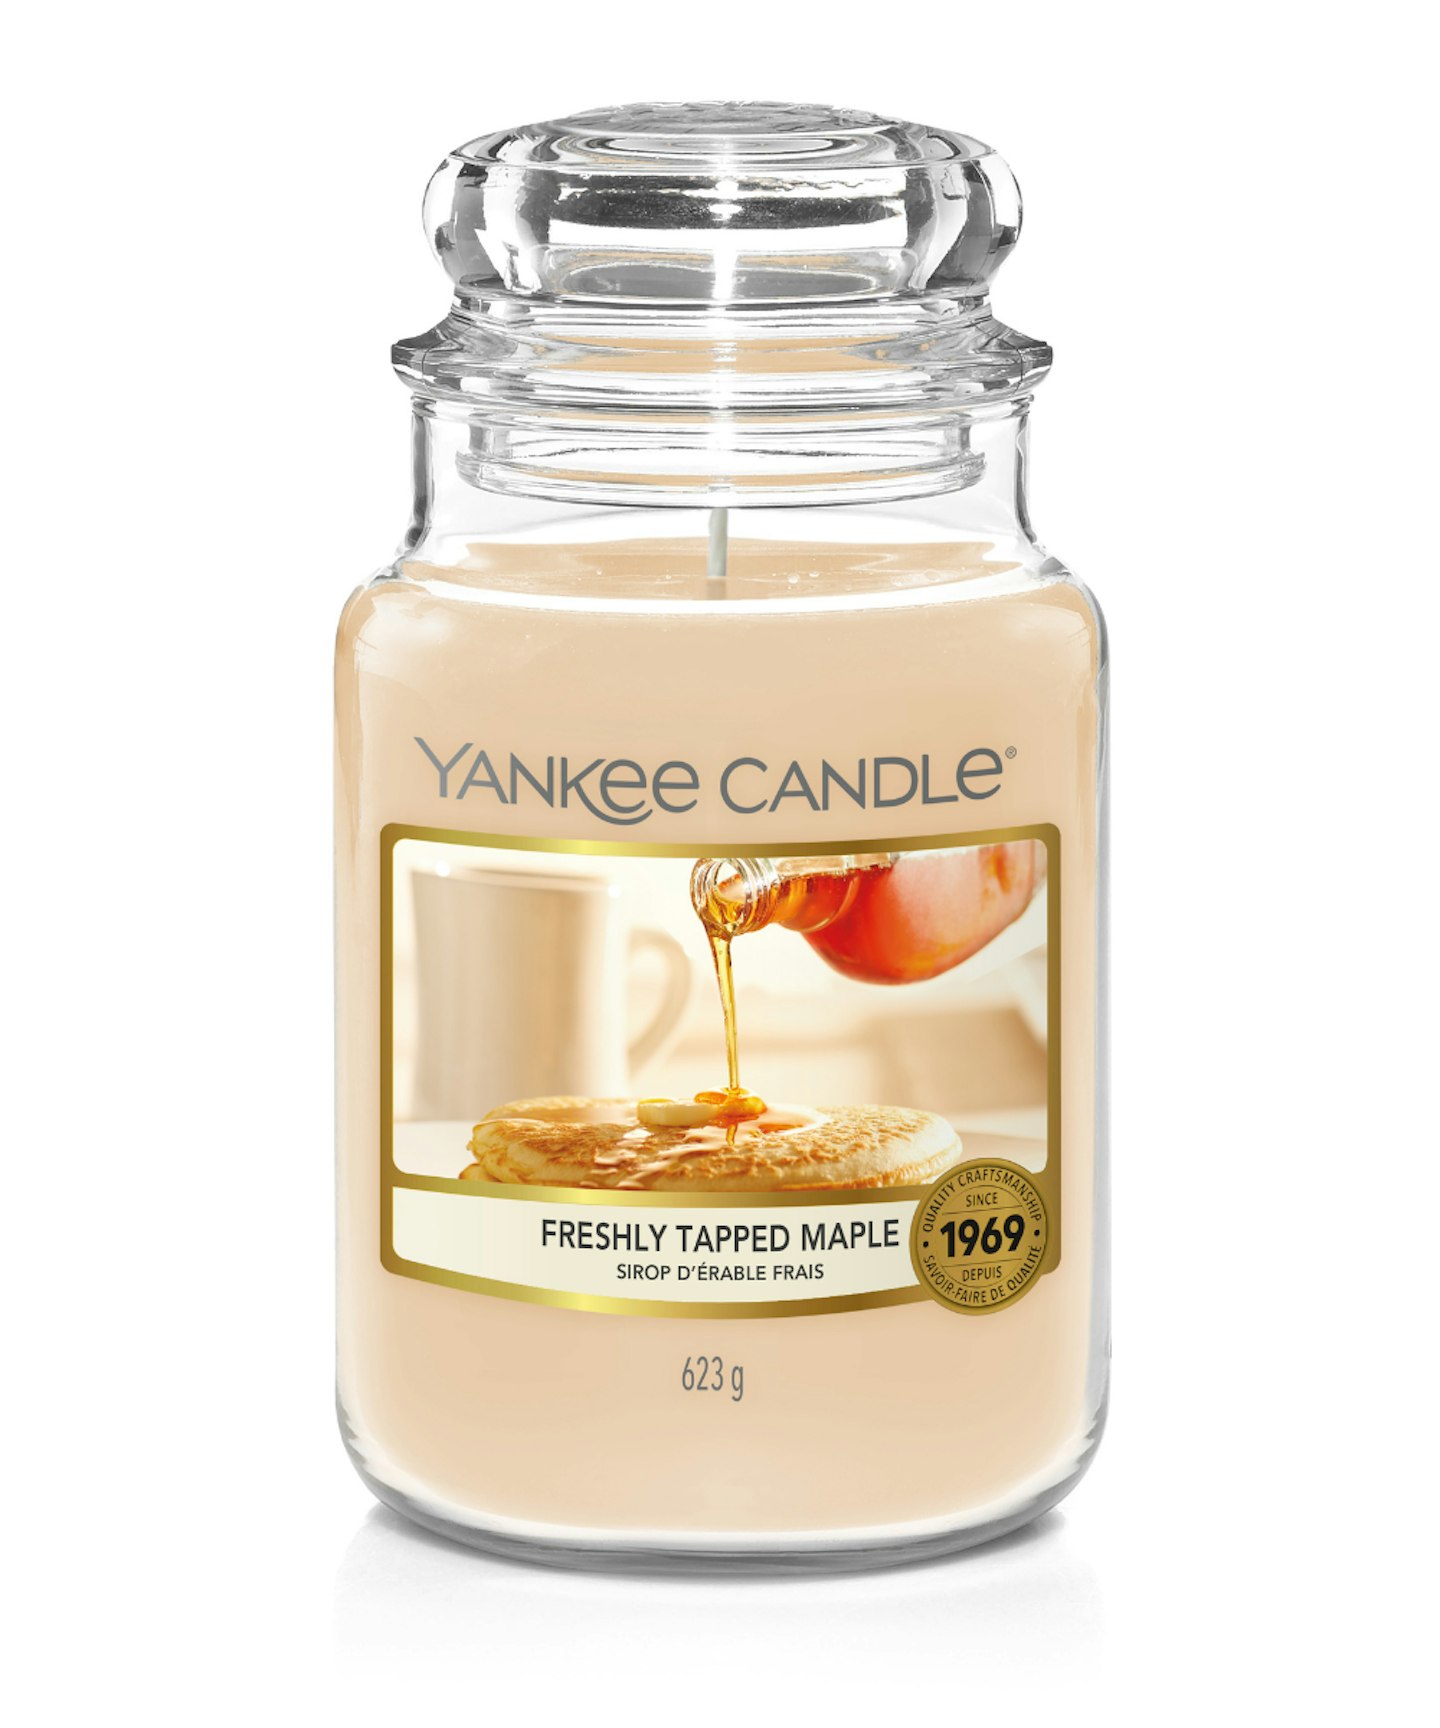 Yankee Candle Candle, Freshly Tapped Maple (Large)